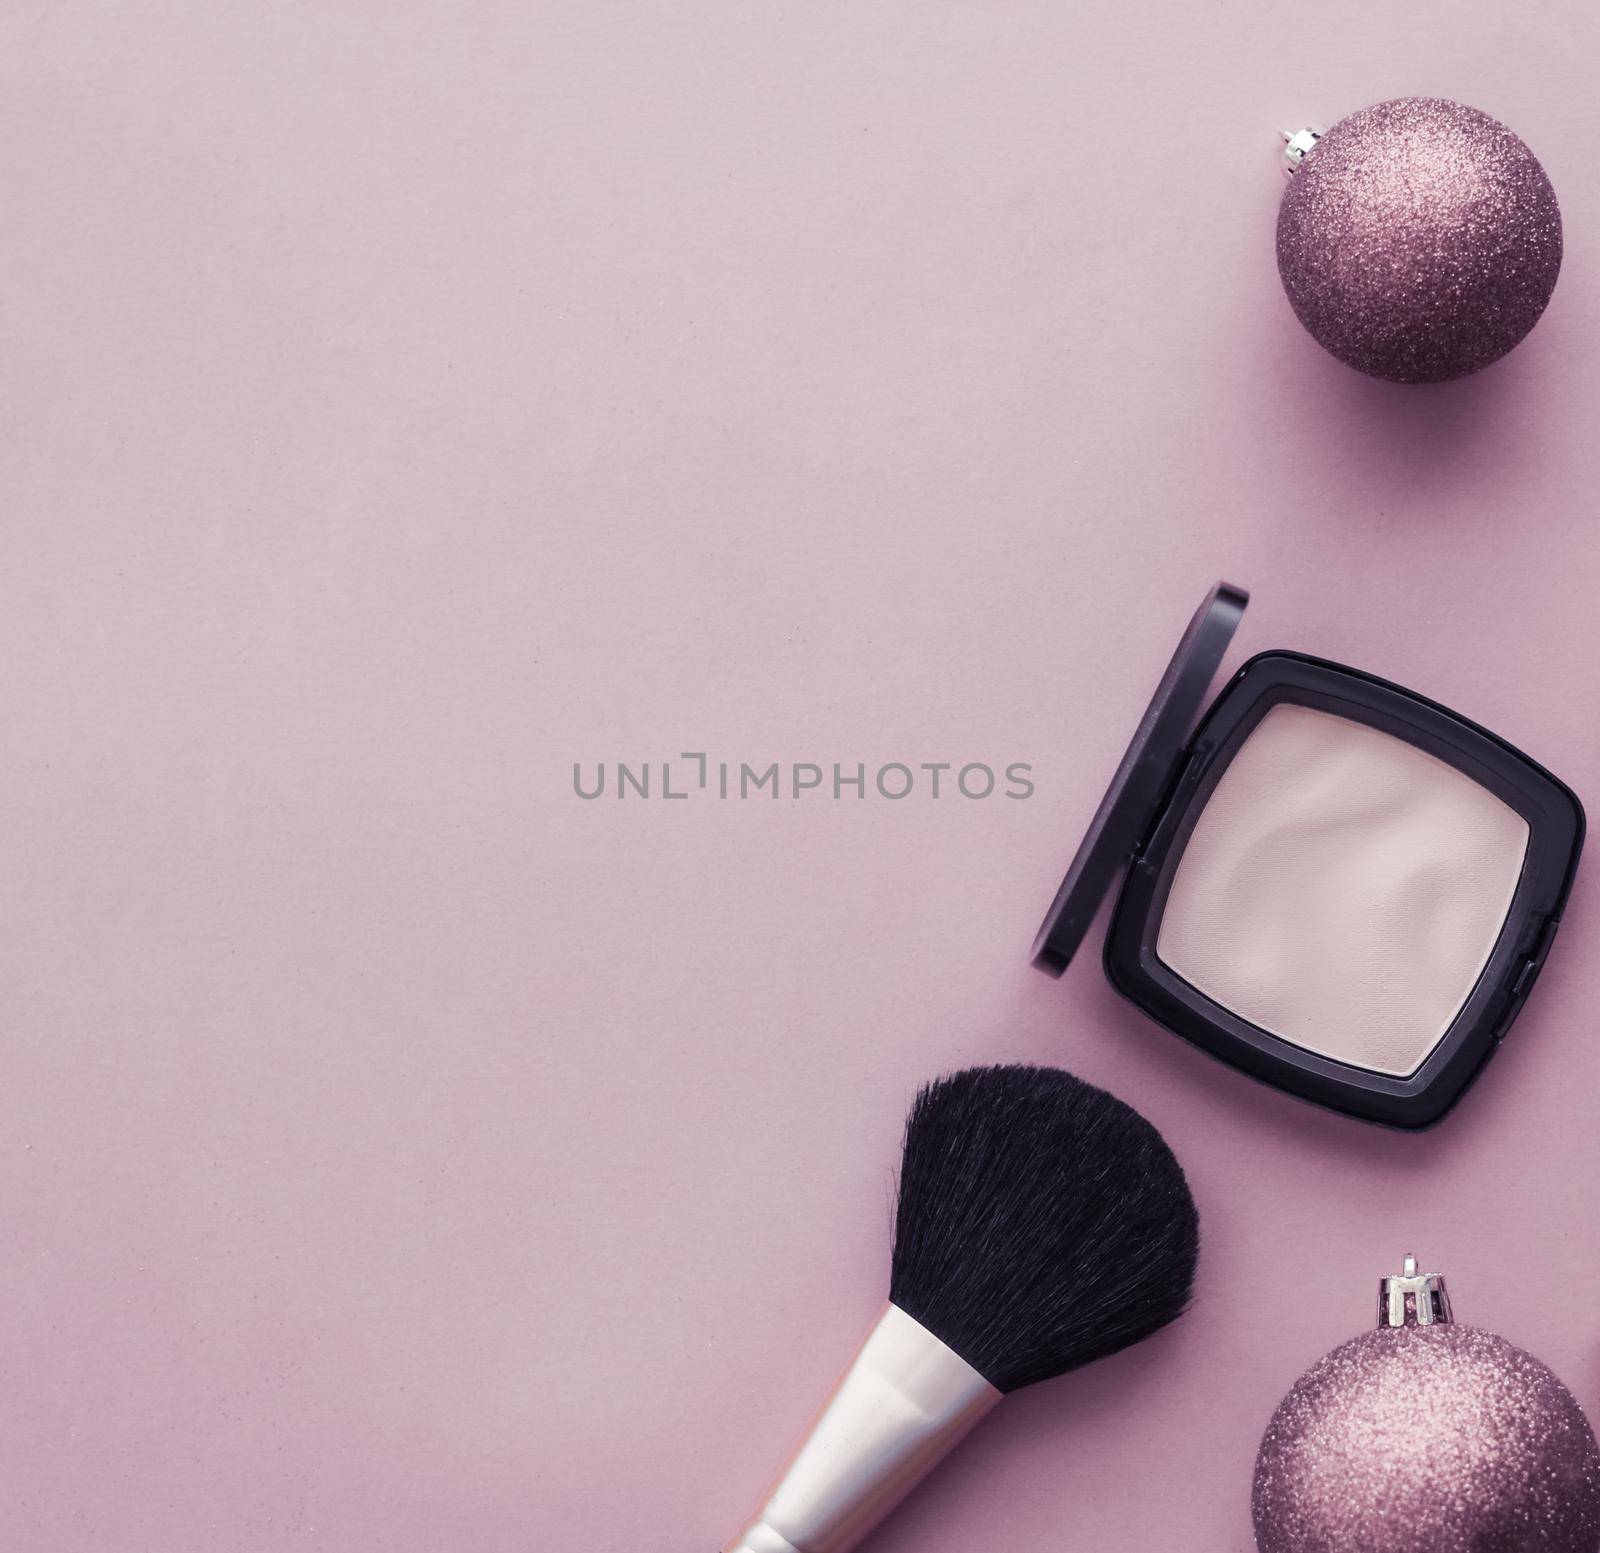 Make-up and cosmetics product set for beauty brand Christmas sale promotion, luxury purple flatlay background as holiday design by Anneleven